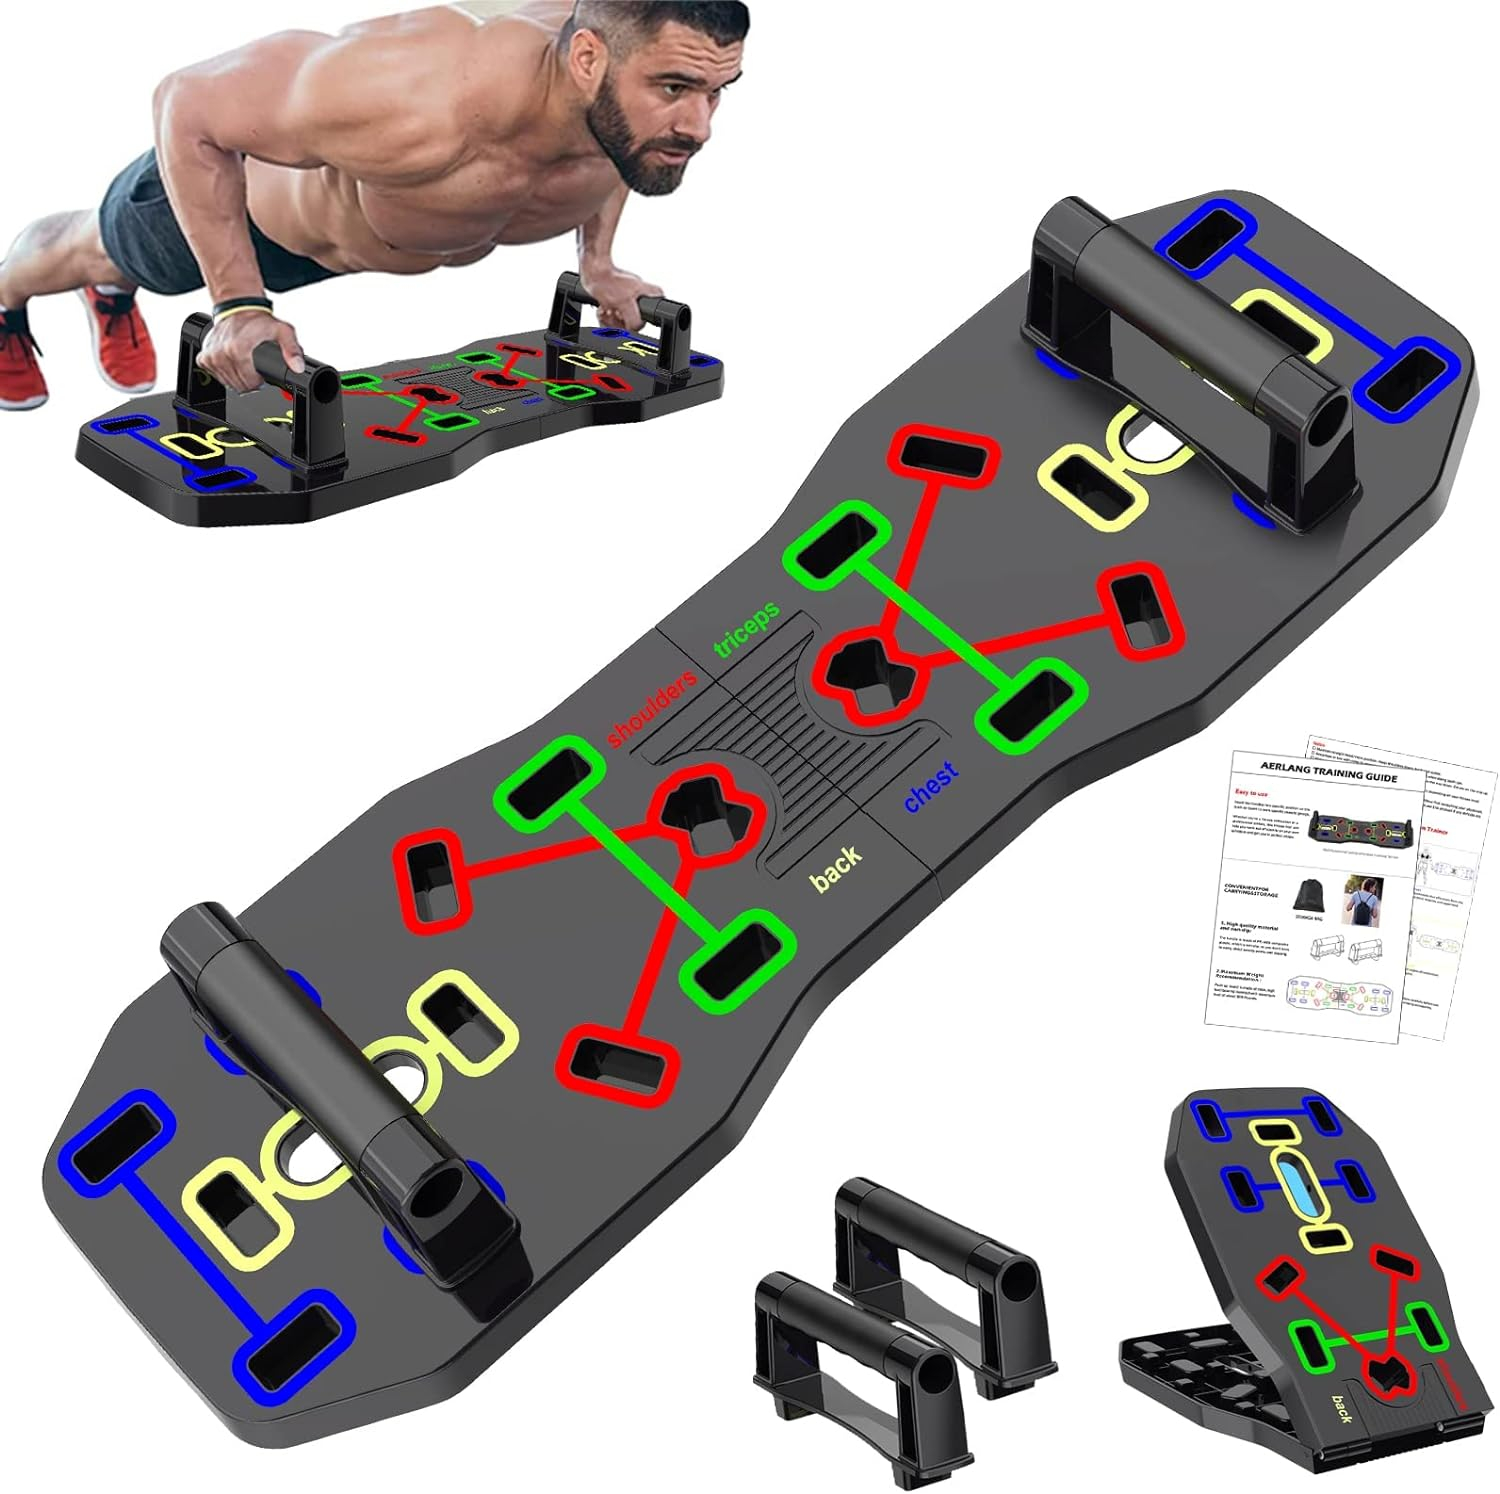 AERLANG Push Up Board, Portable Multi-Function Foldable 10 in 1 Push Up Bar, Push up Handles for Floor,Professional Push Up Strength Training Equipment